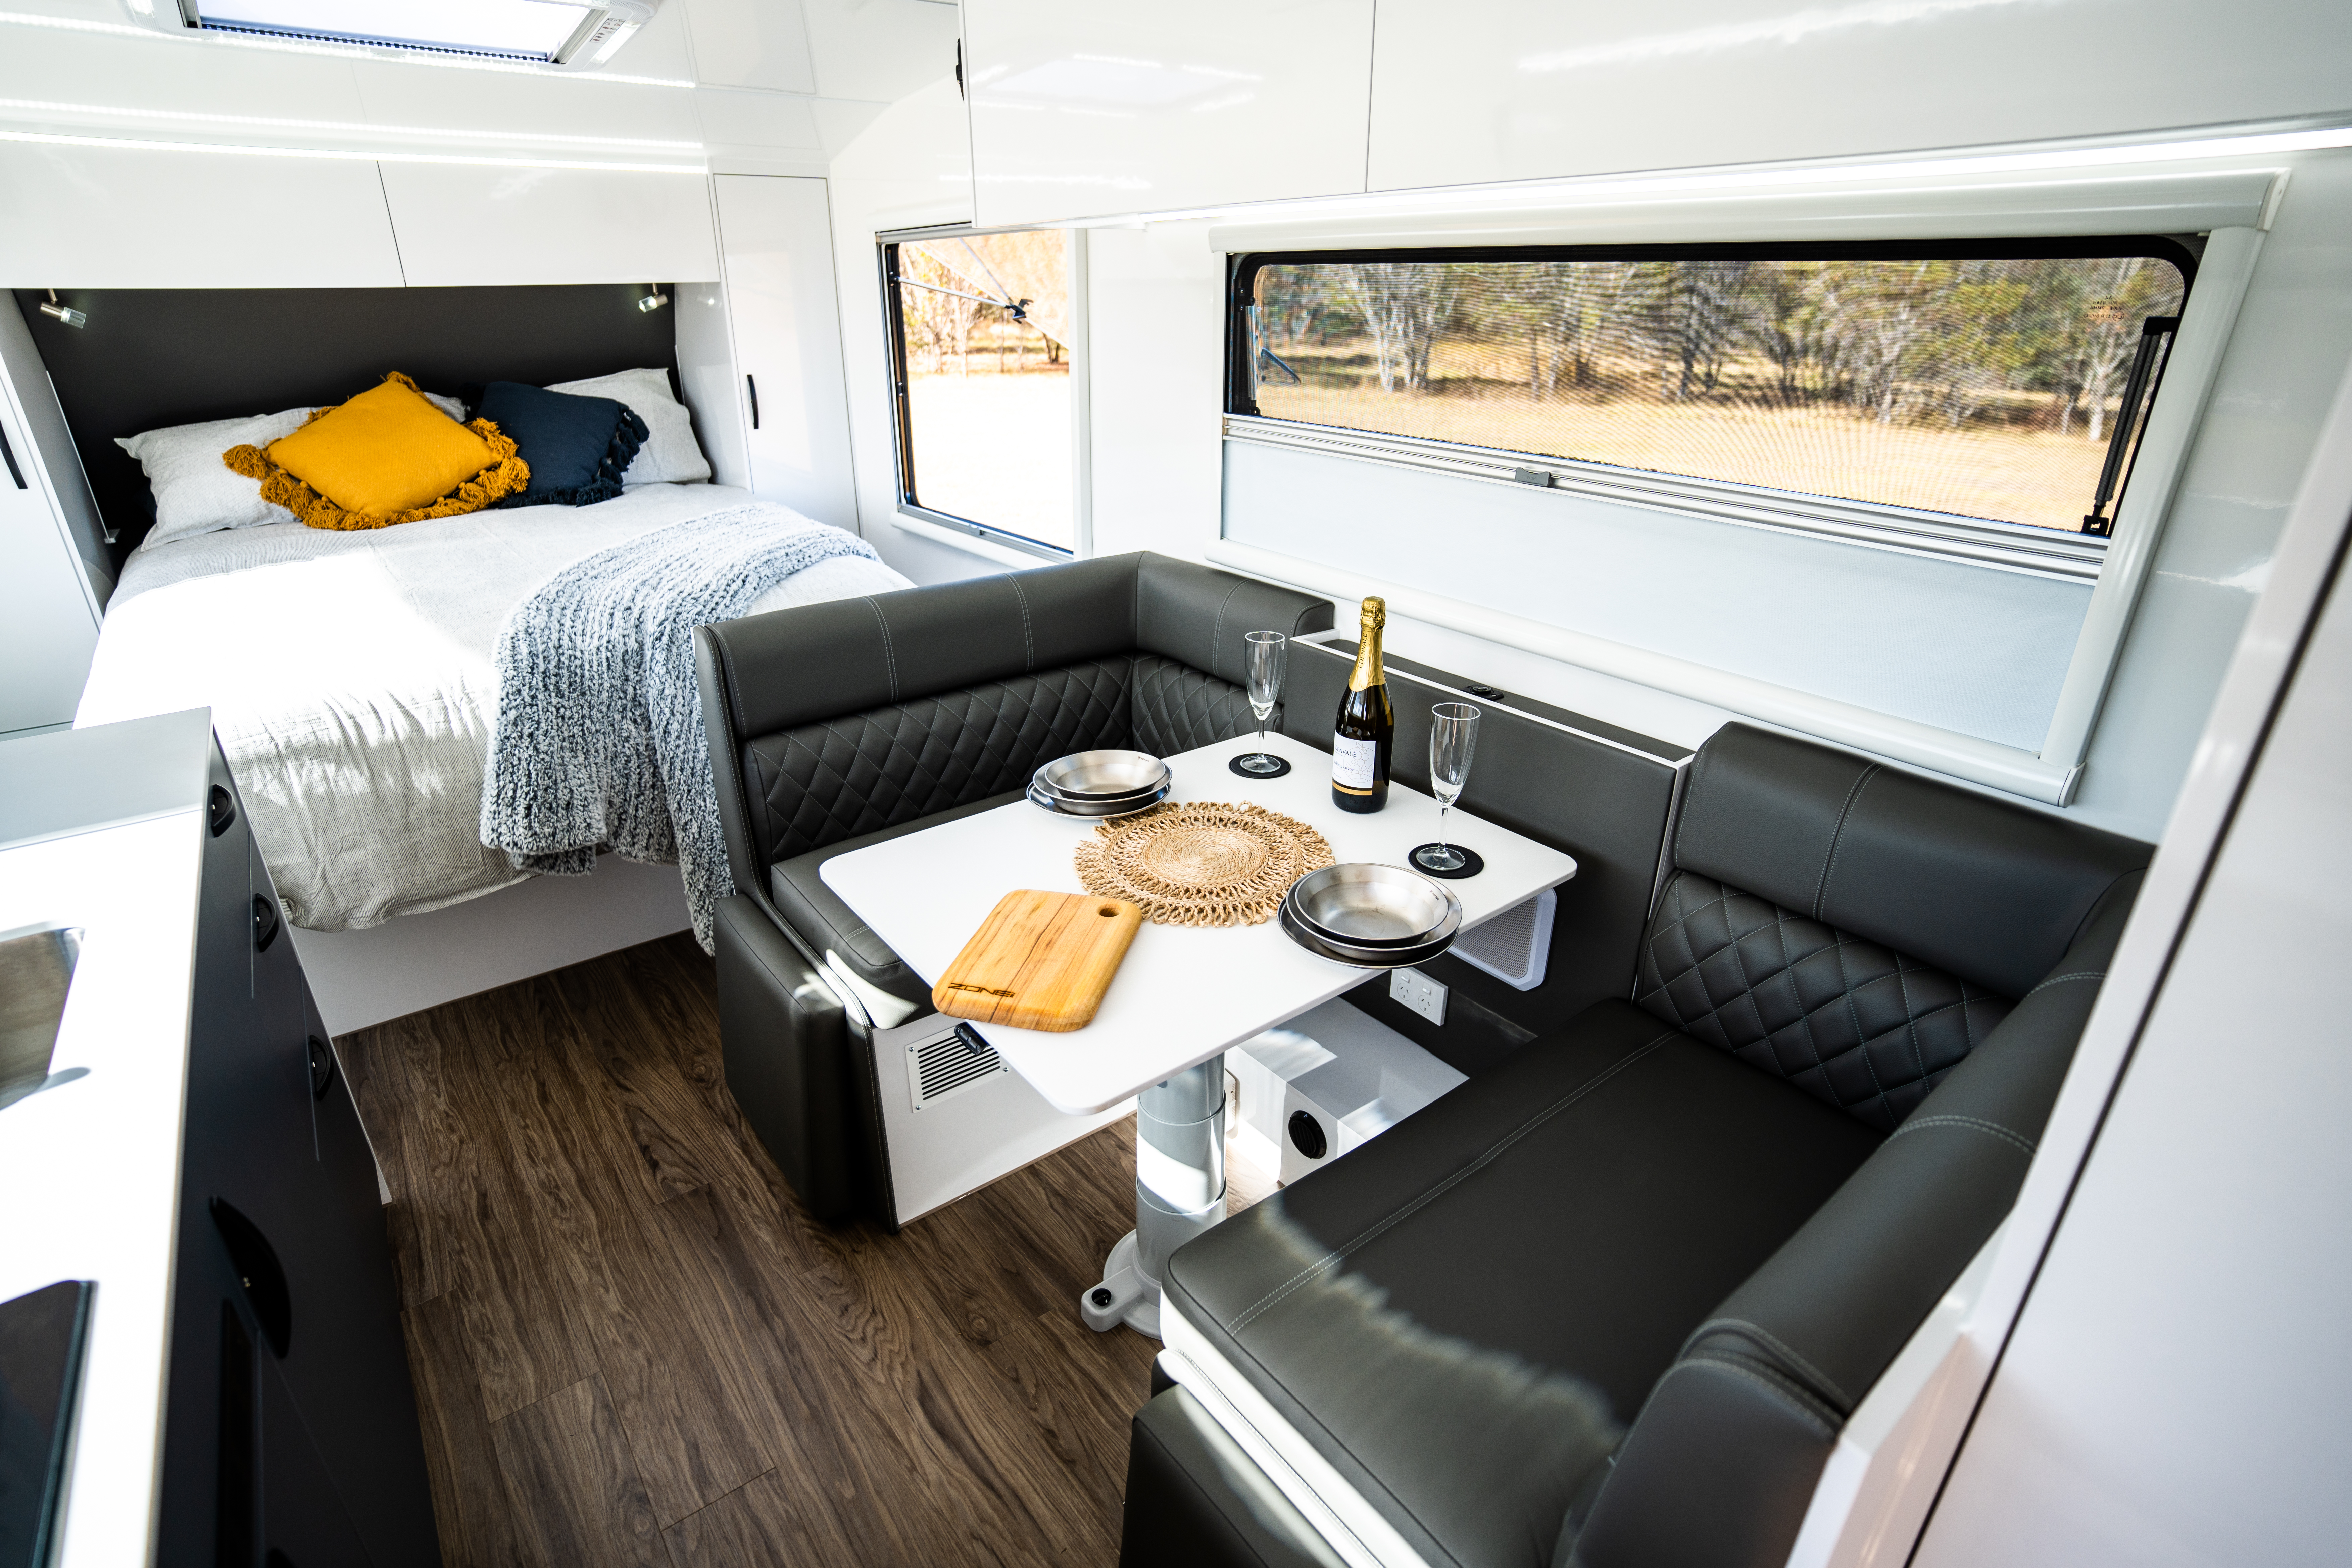 WHAT ARE THE BENEFITS OF A GASLESS OFF-ROAD CARAVAN?